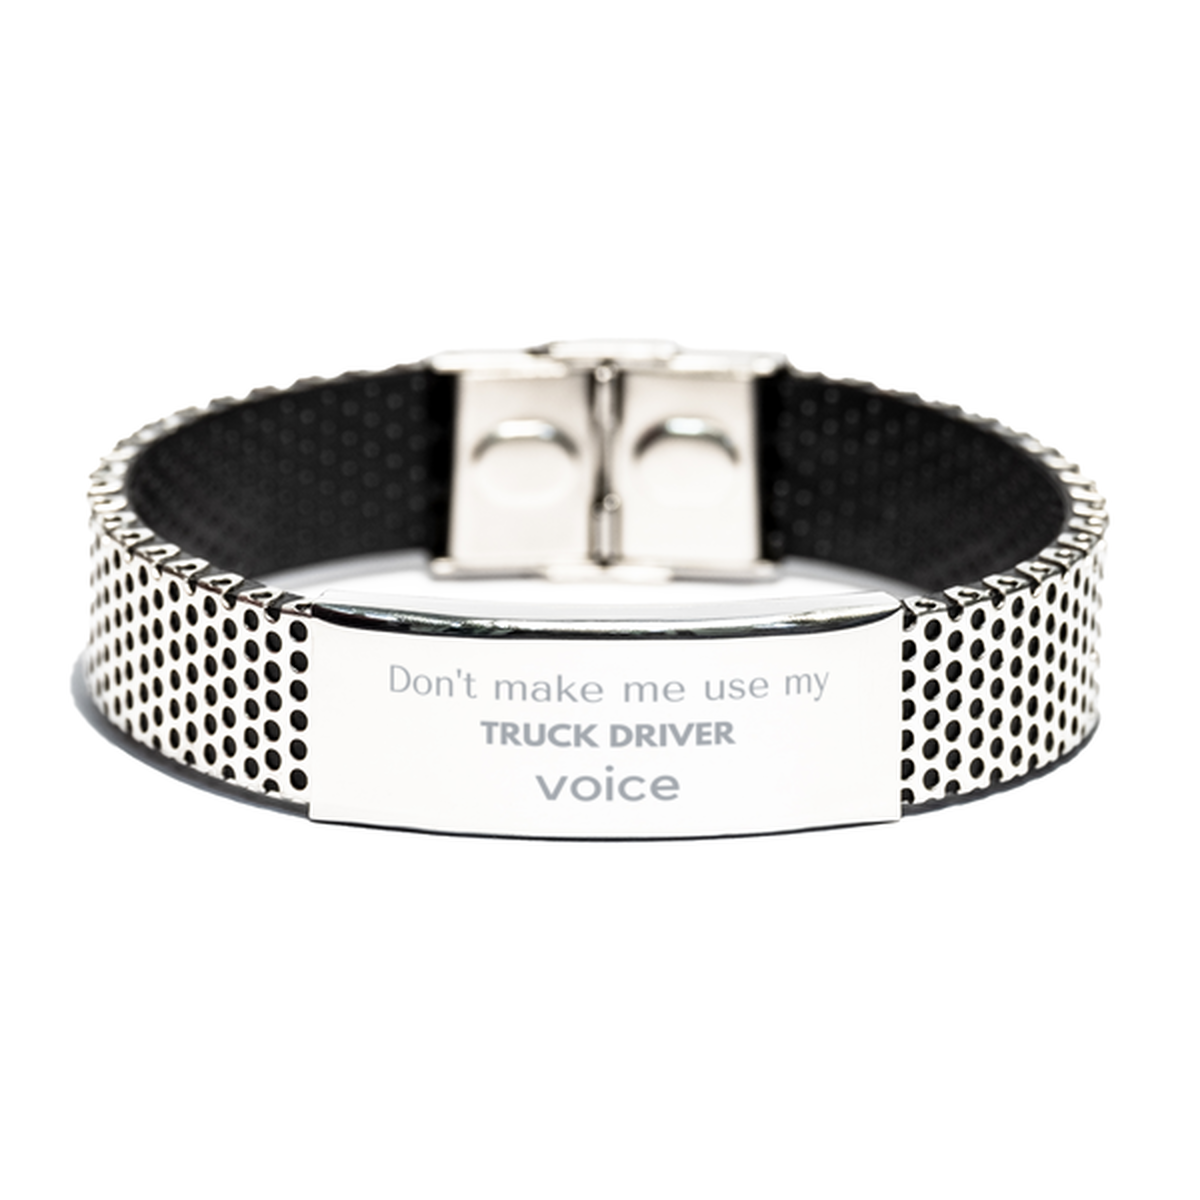 Don't make me use my Truck Driver voice, Sarcasm Truck Driver Gifts, Christmas Truck Driver Stainless Steel Bracelet Birthday Unique Gifts For Truck Driver Coworkers, Men, Women, Colleague, Friends